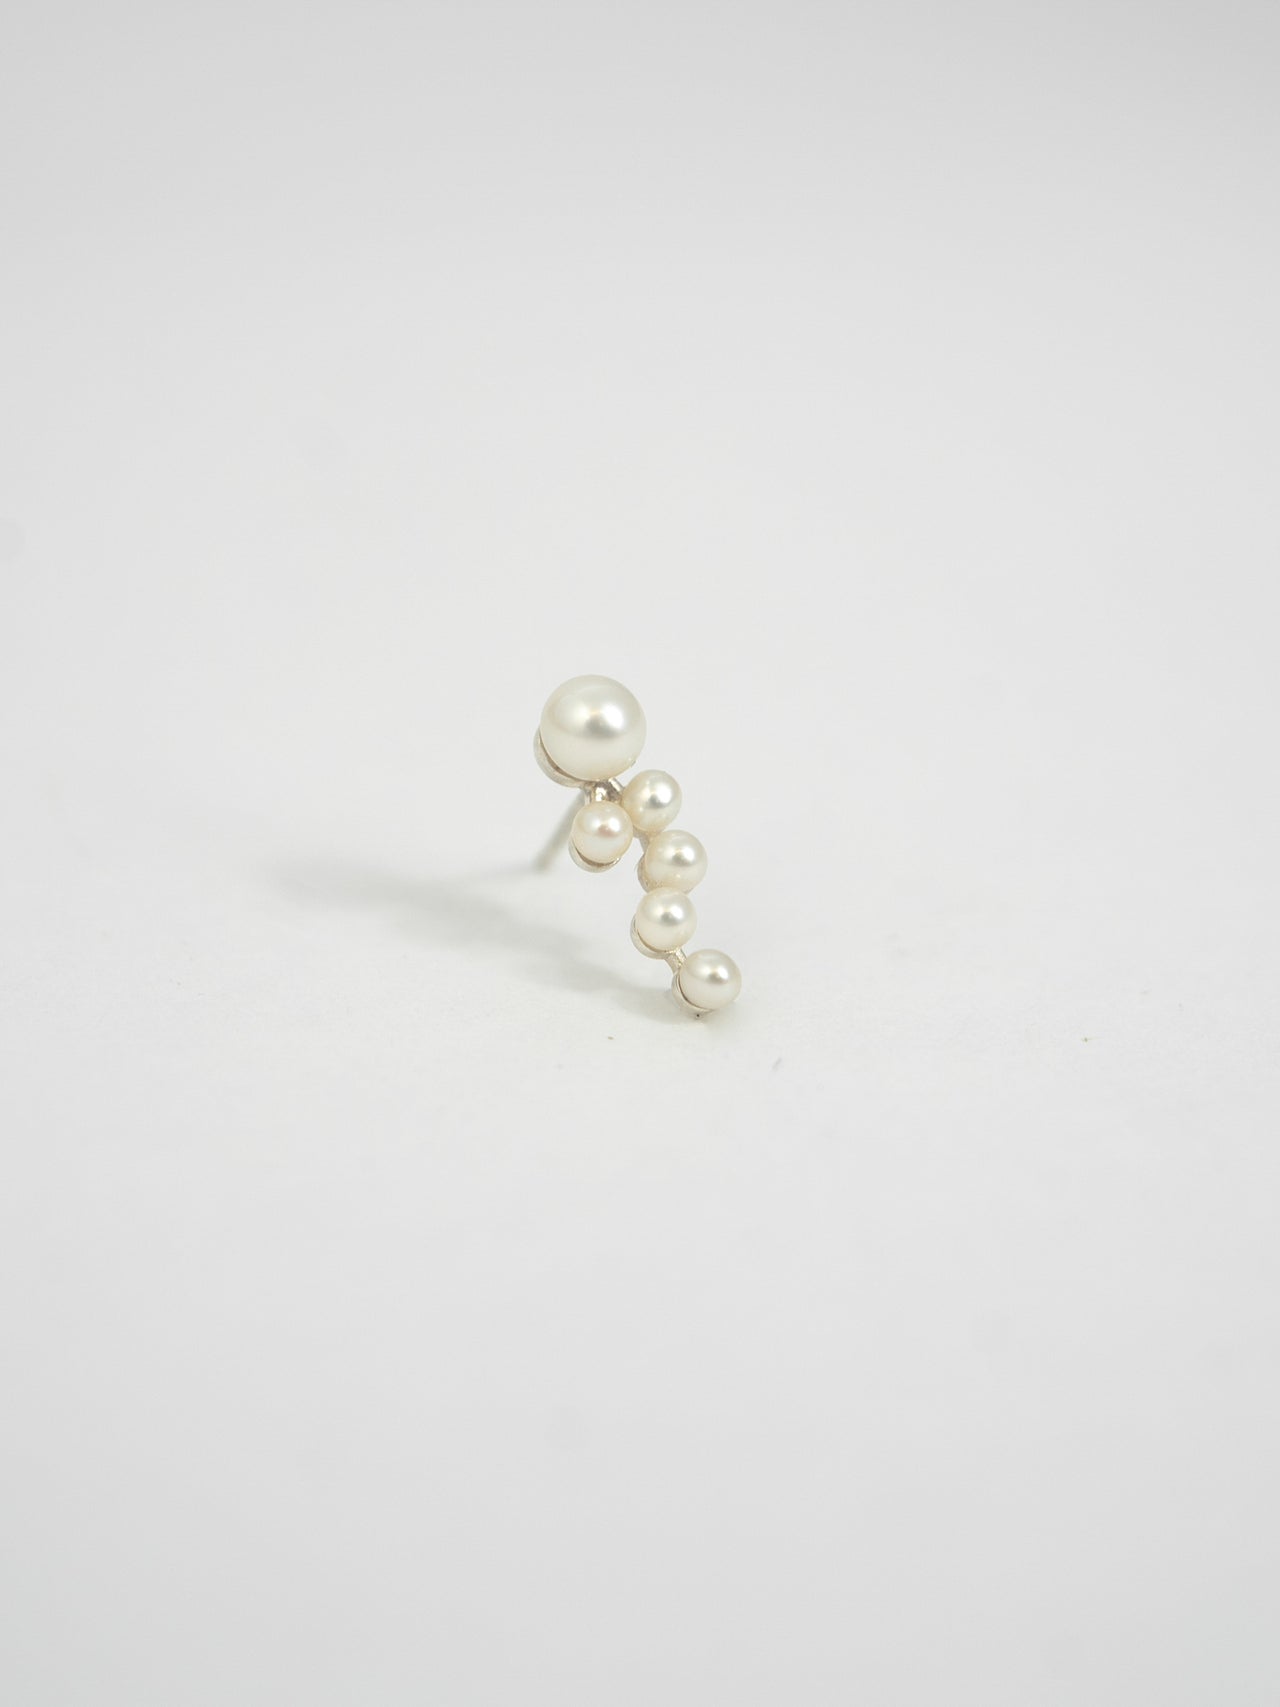 Product image of Astropearl Ear Climber. Larger pearl at base of stud with smaller pearls cascading down. Product shot on white background. 